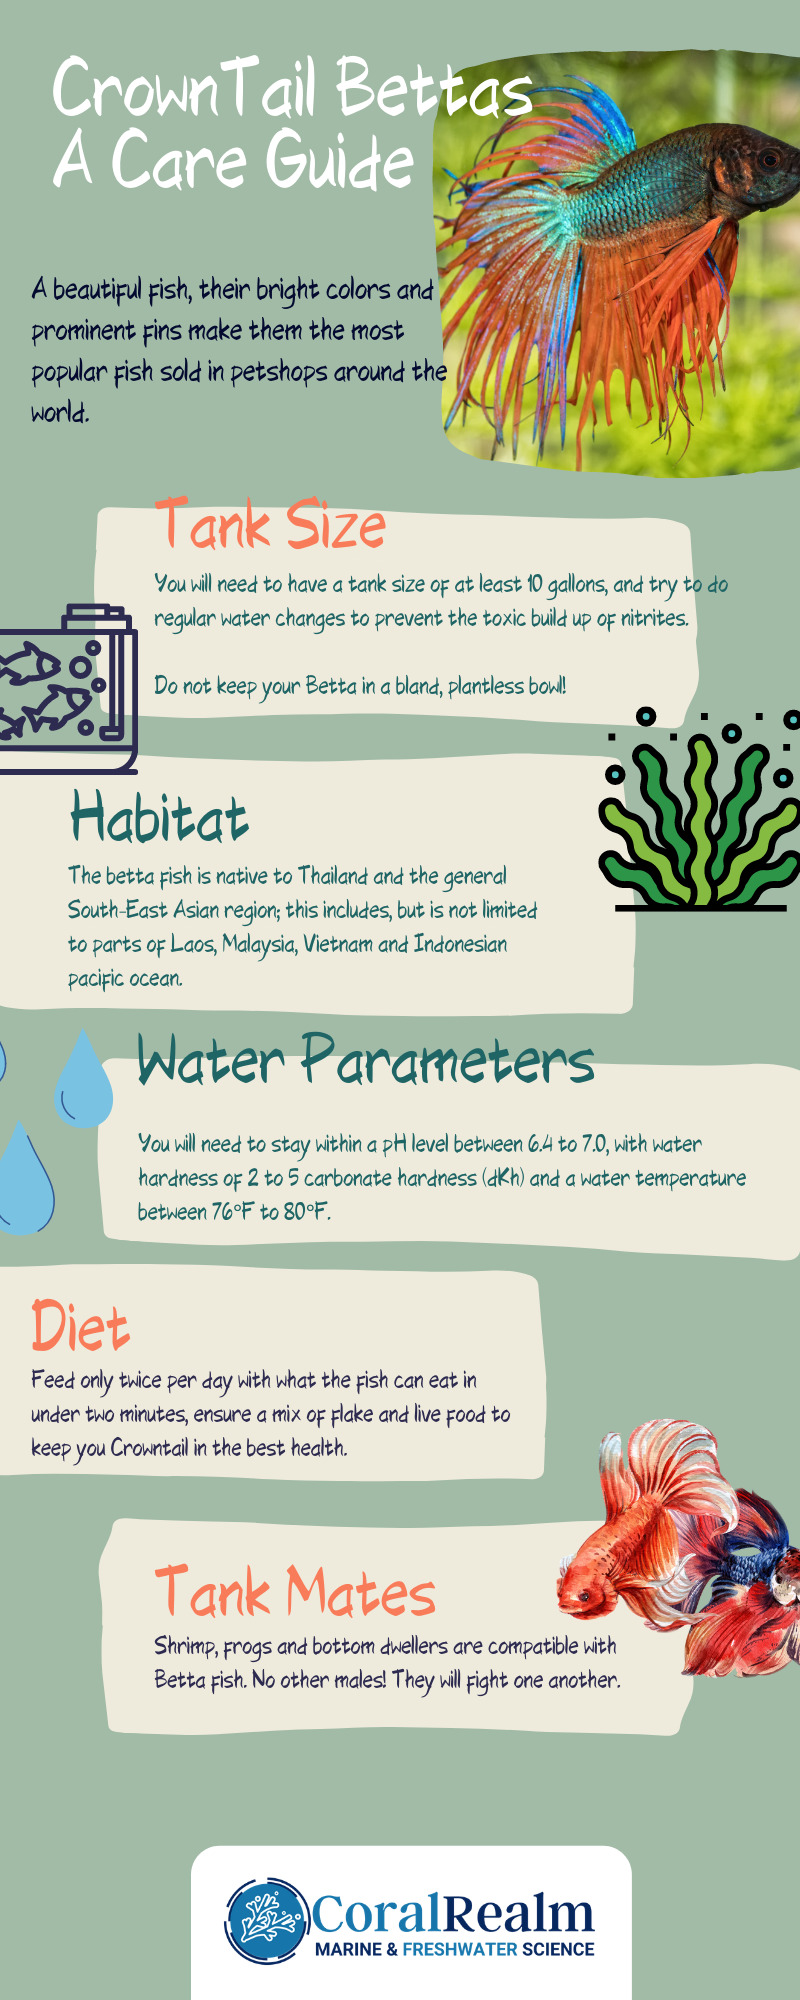 Clown tail Betta care guide infographic